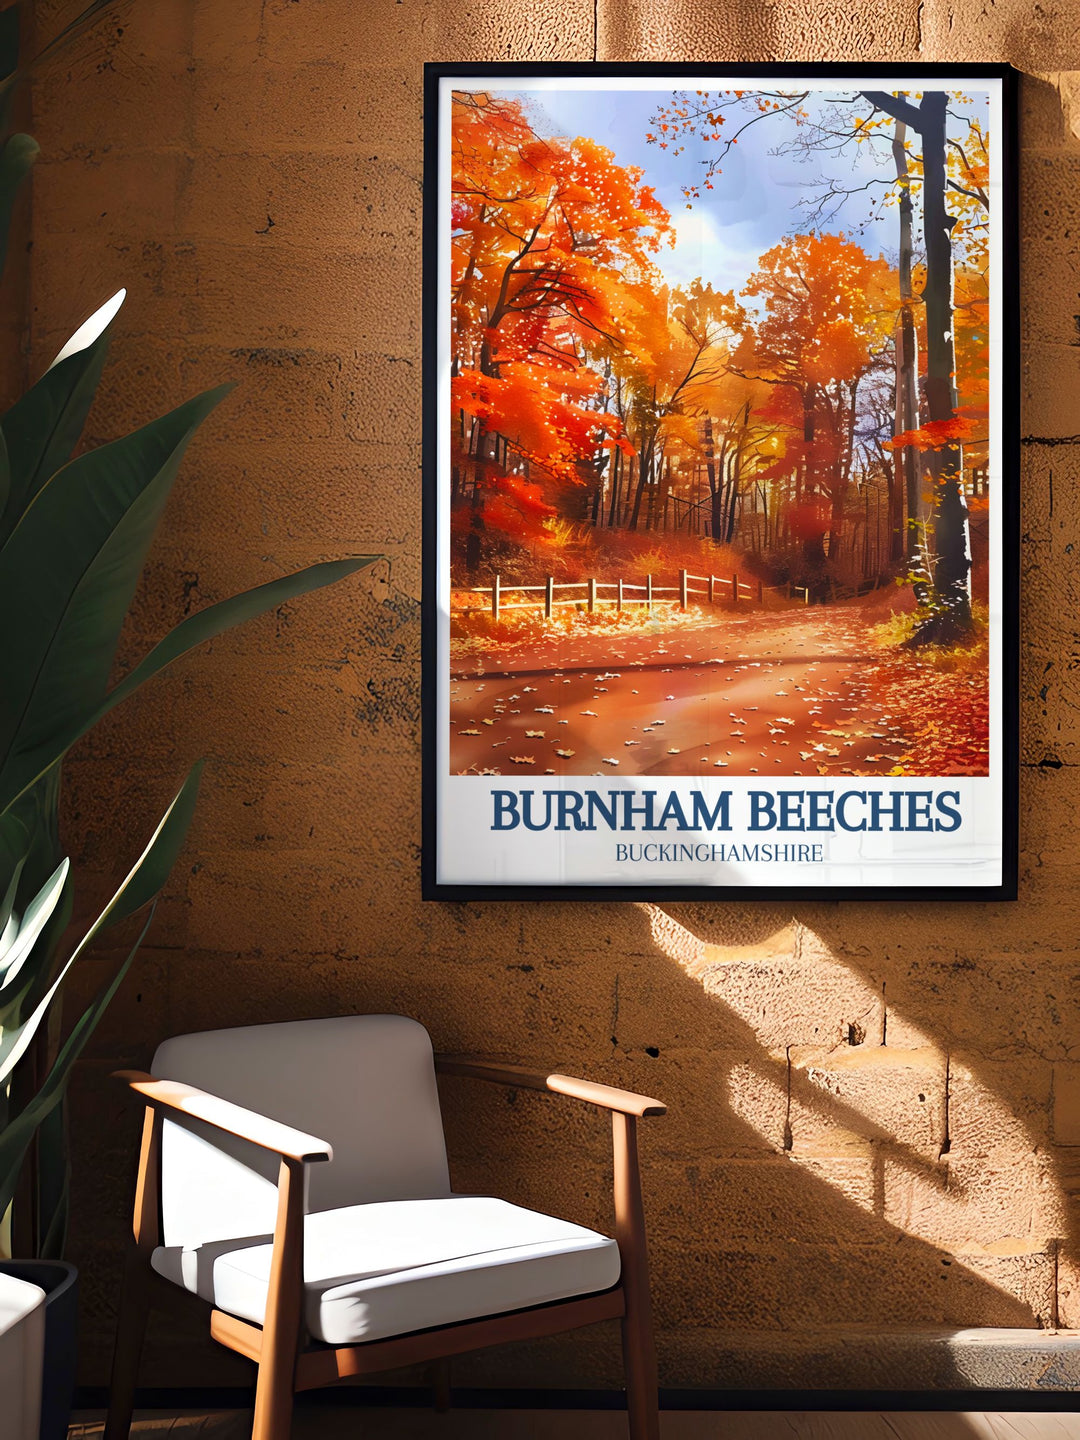 Featuring lush vistas of Burnham Beeches and the iconic Farnham Common, this poster is perfect for those who wish to bring a piece of the UKs natural beauty and architectural grandeur into their home.